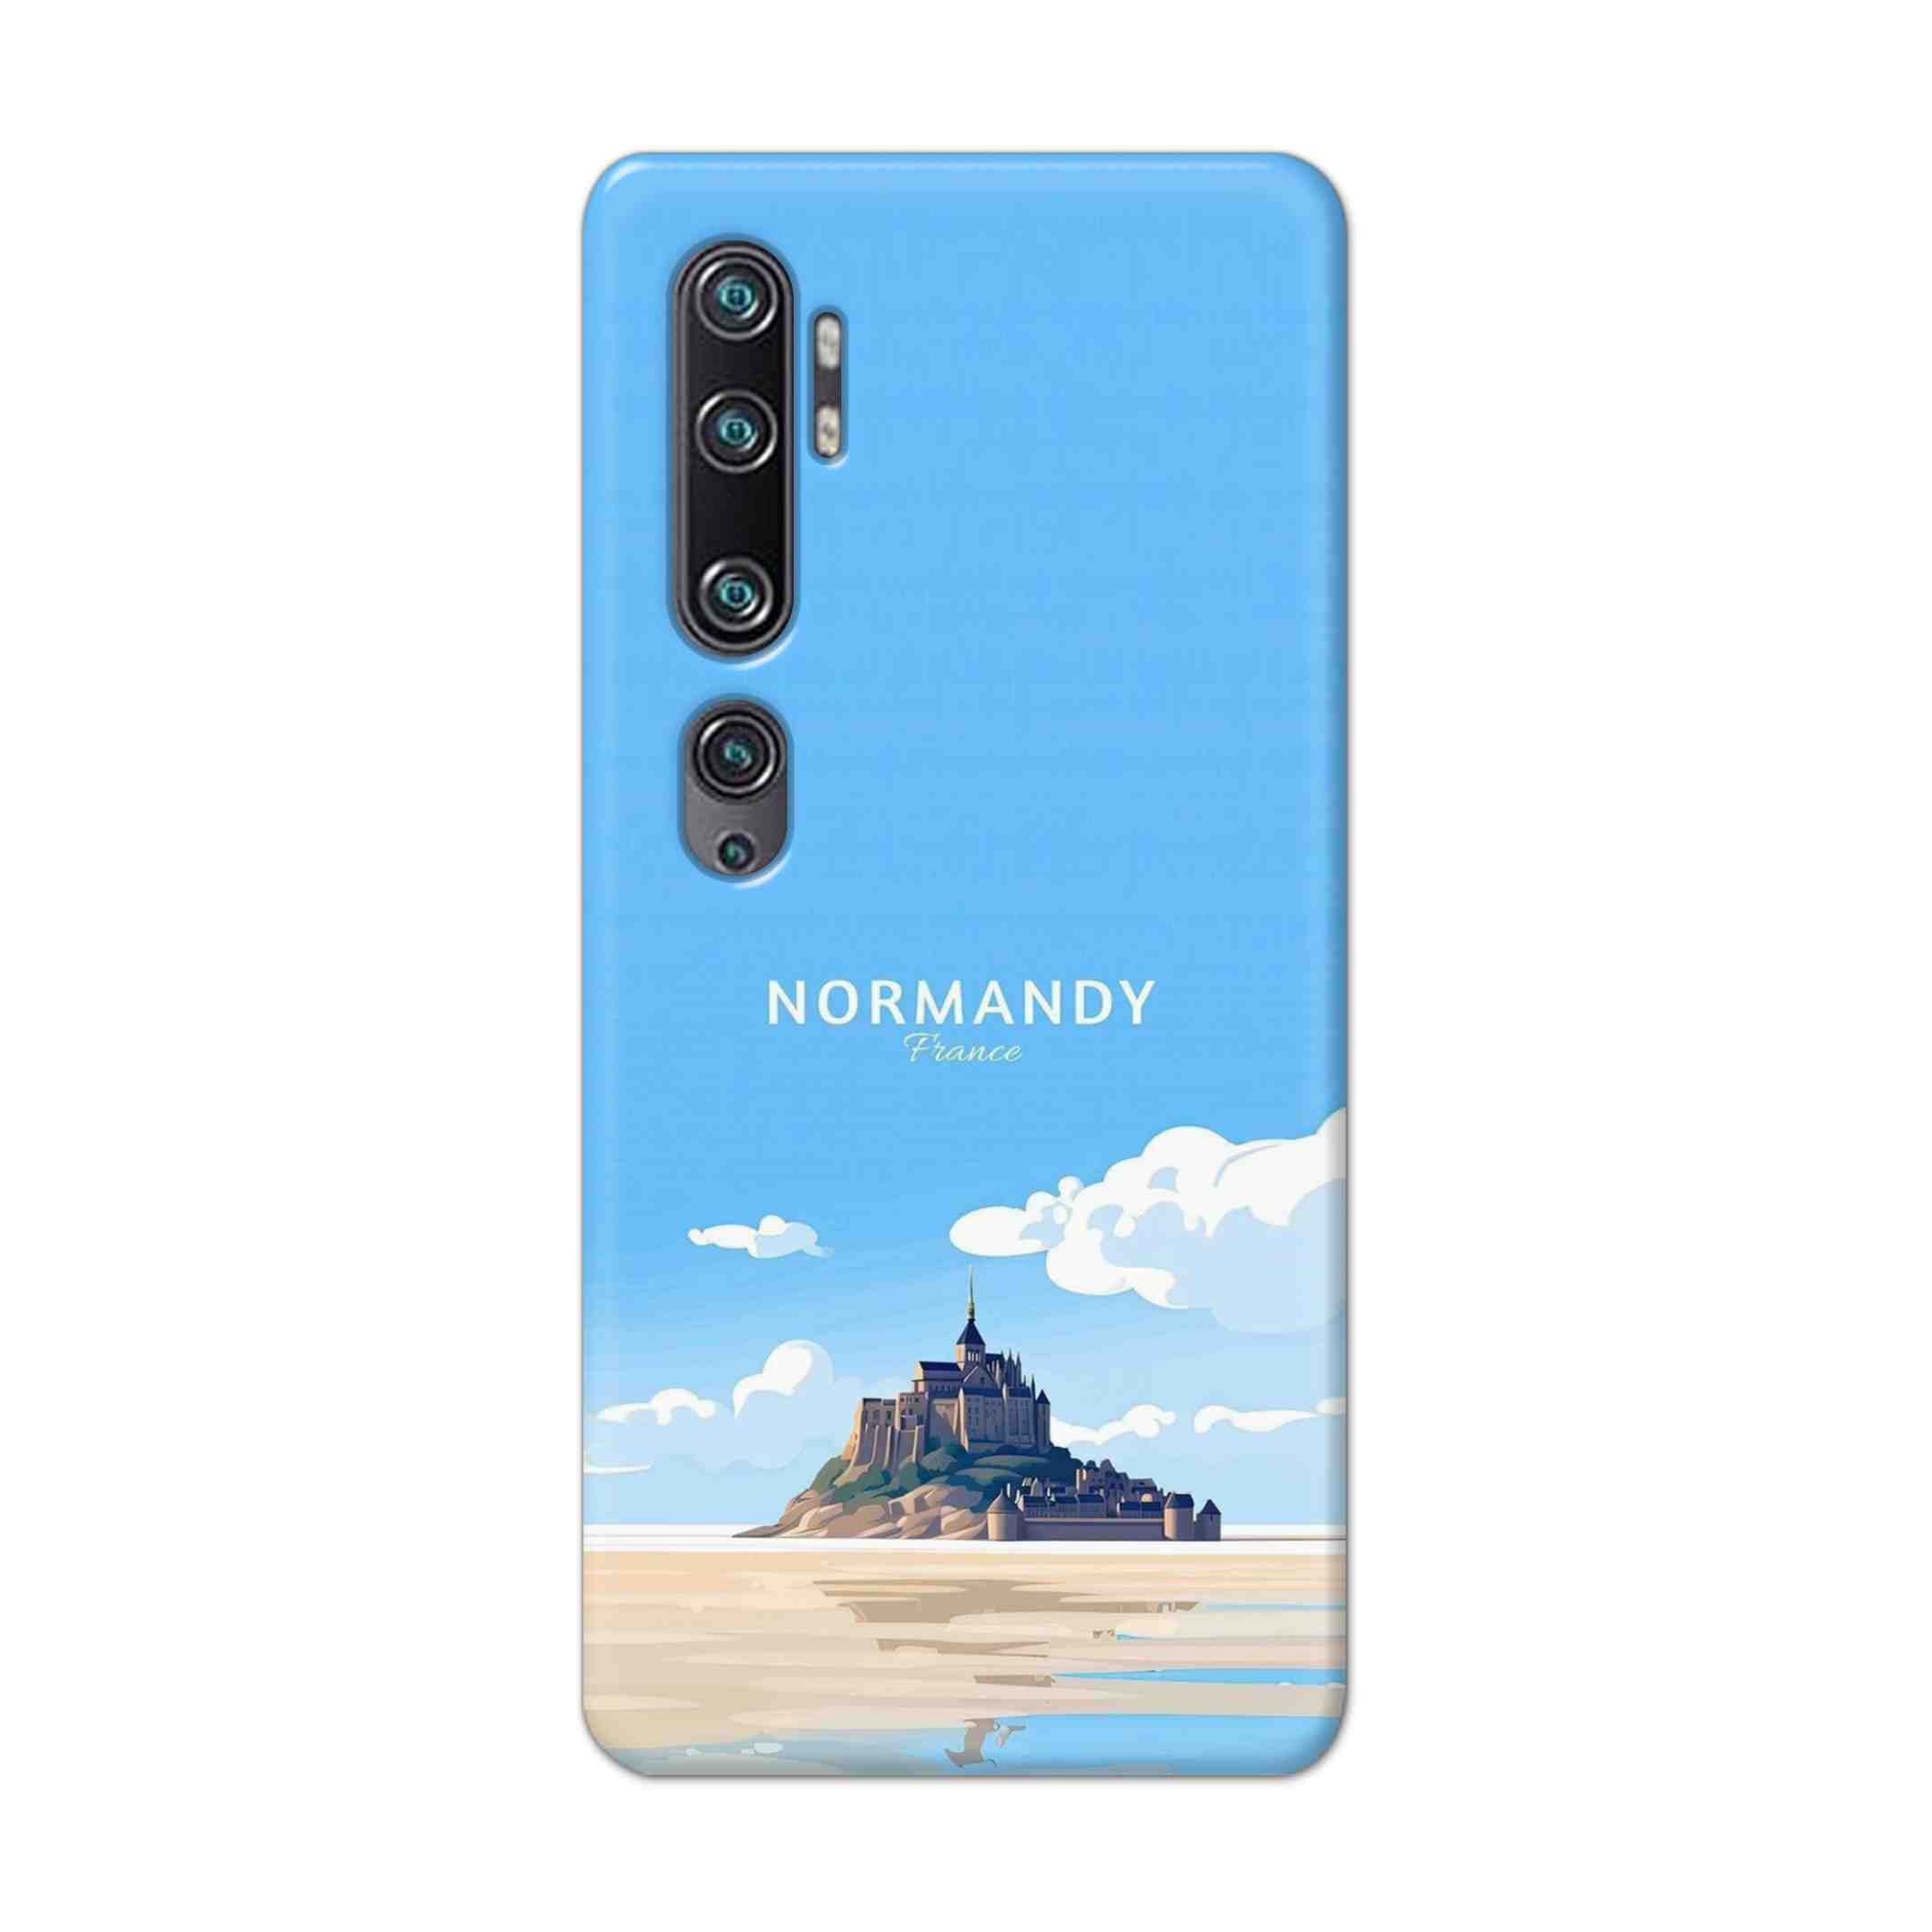 Buy Normandy Hard Back Mobile Phone Case Cover For Xiaomi Mi Note 10 Online